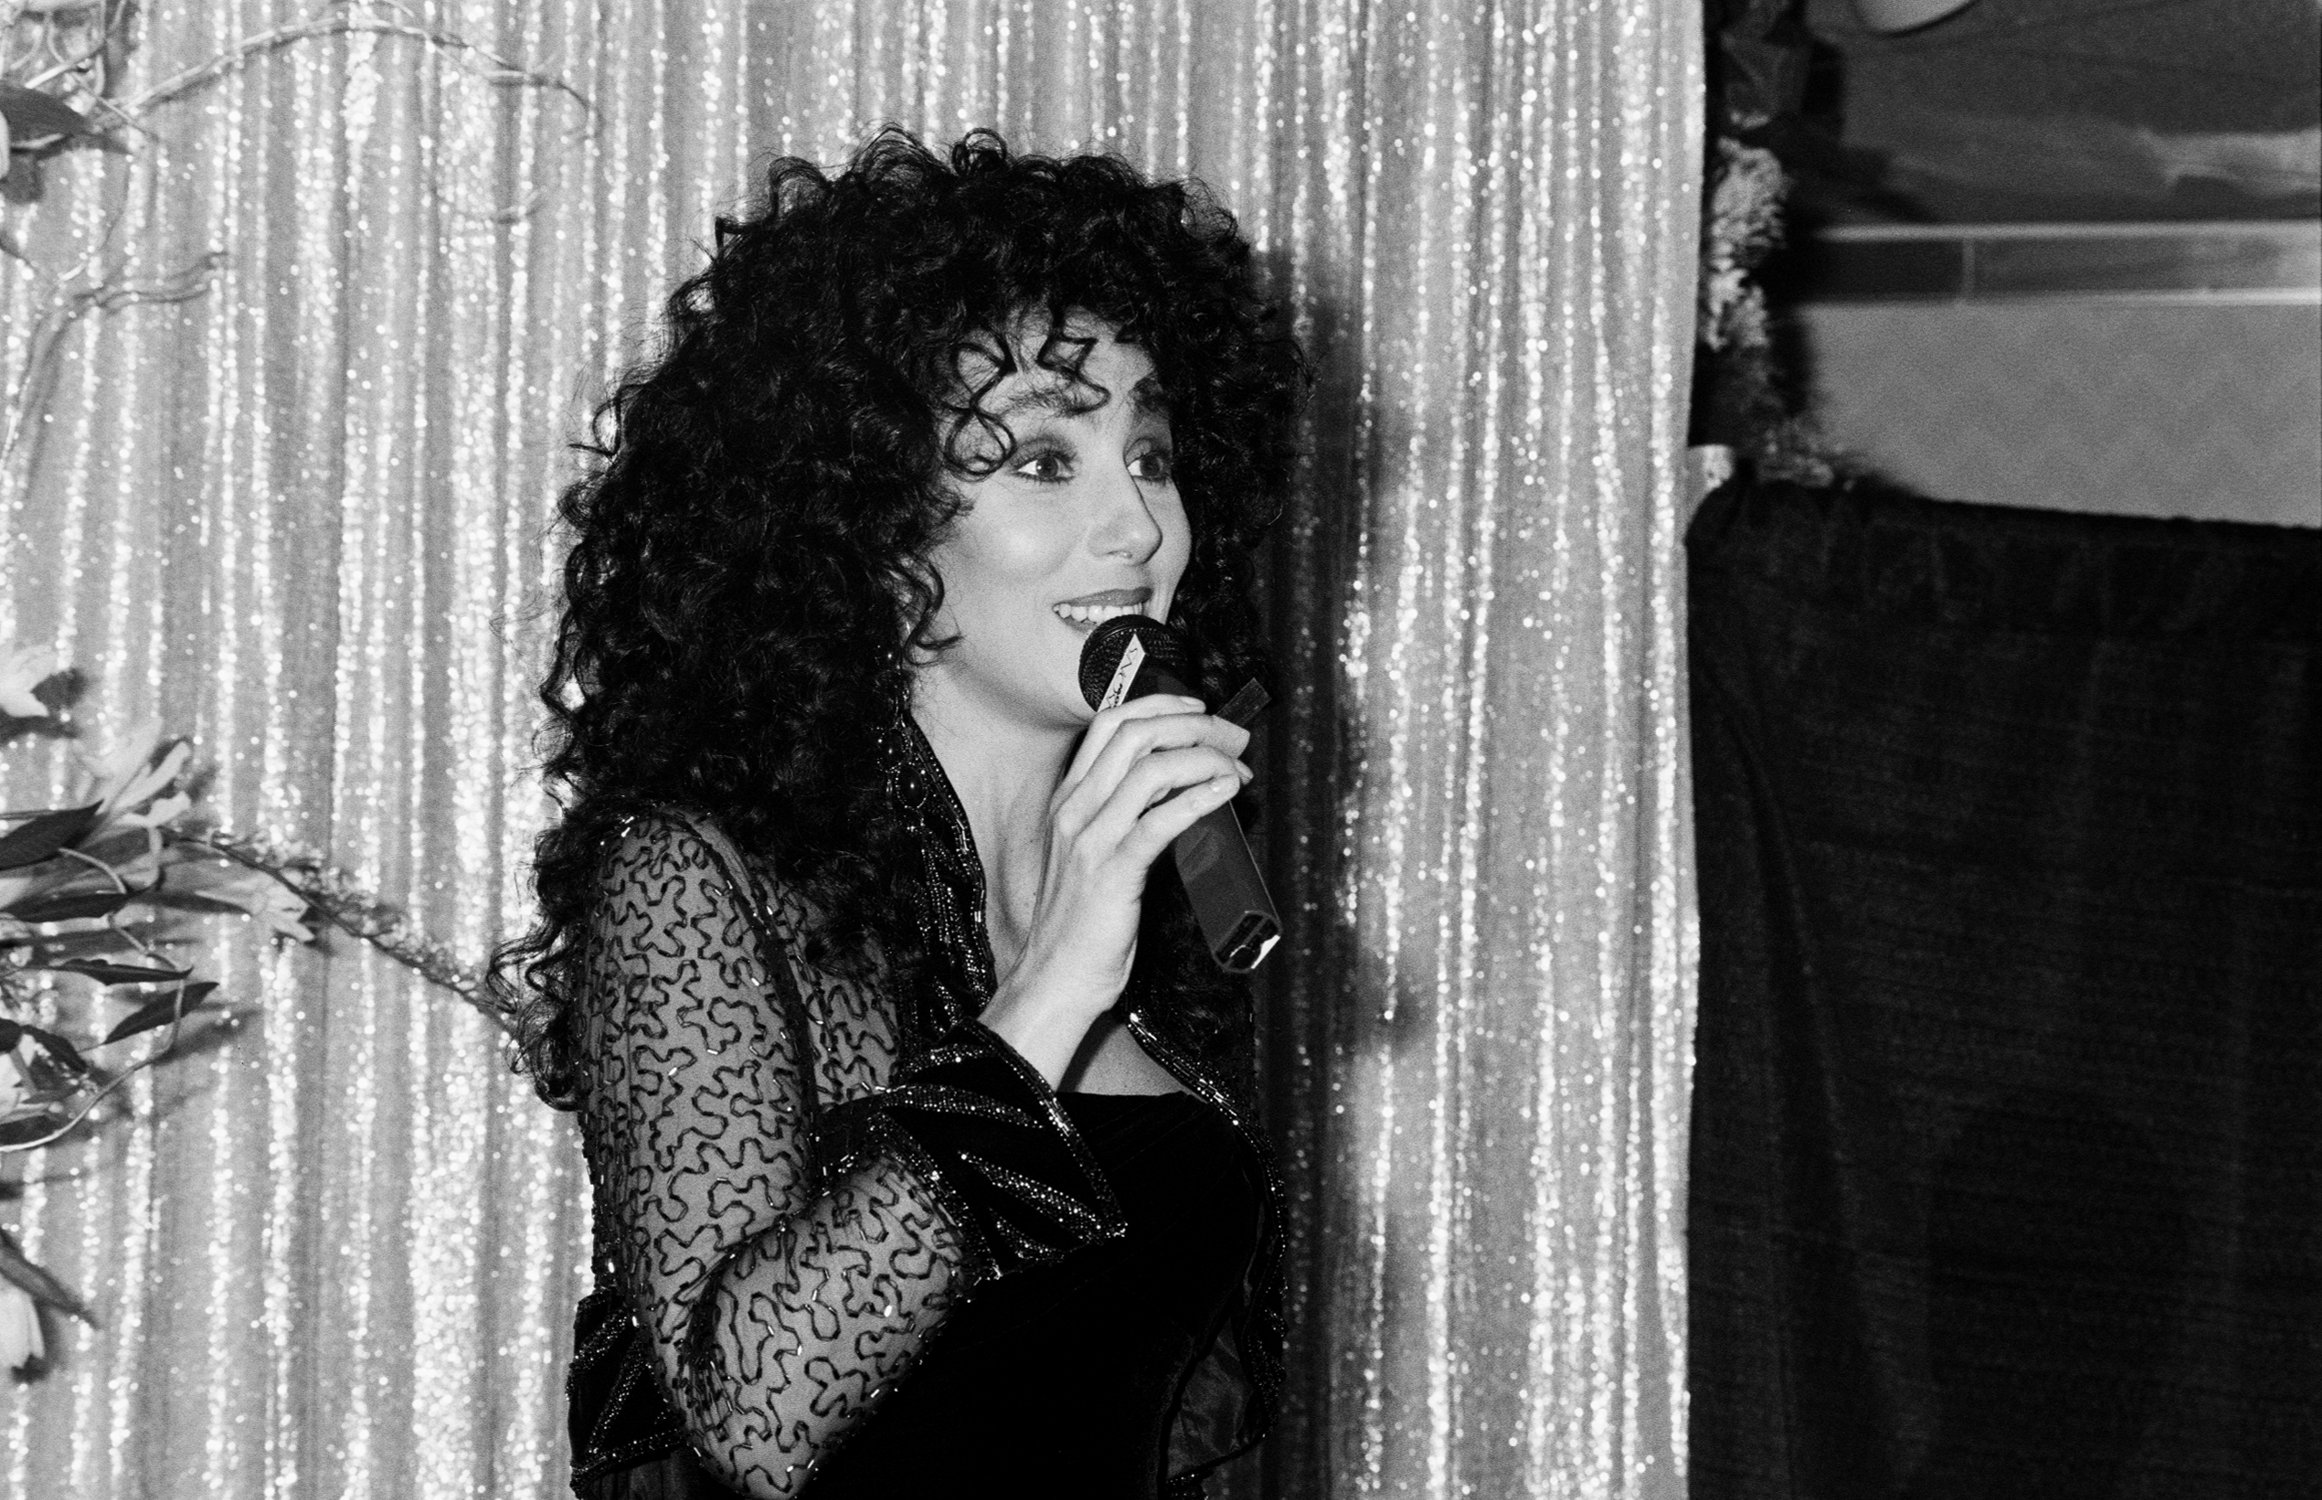 Cher with a microphone